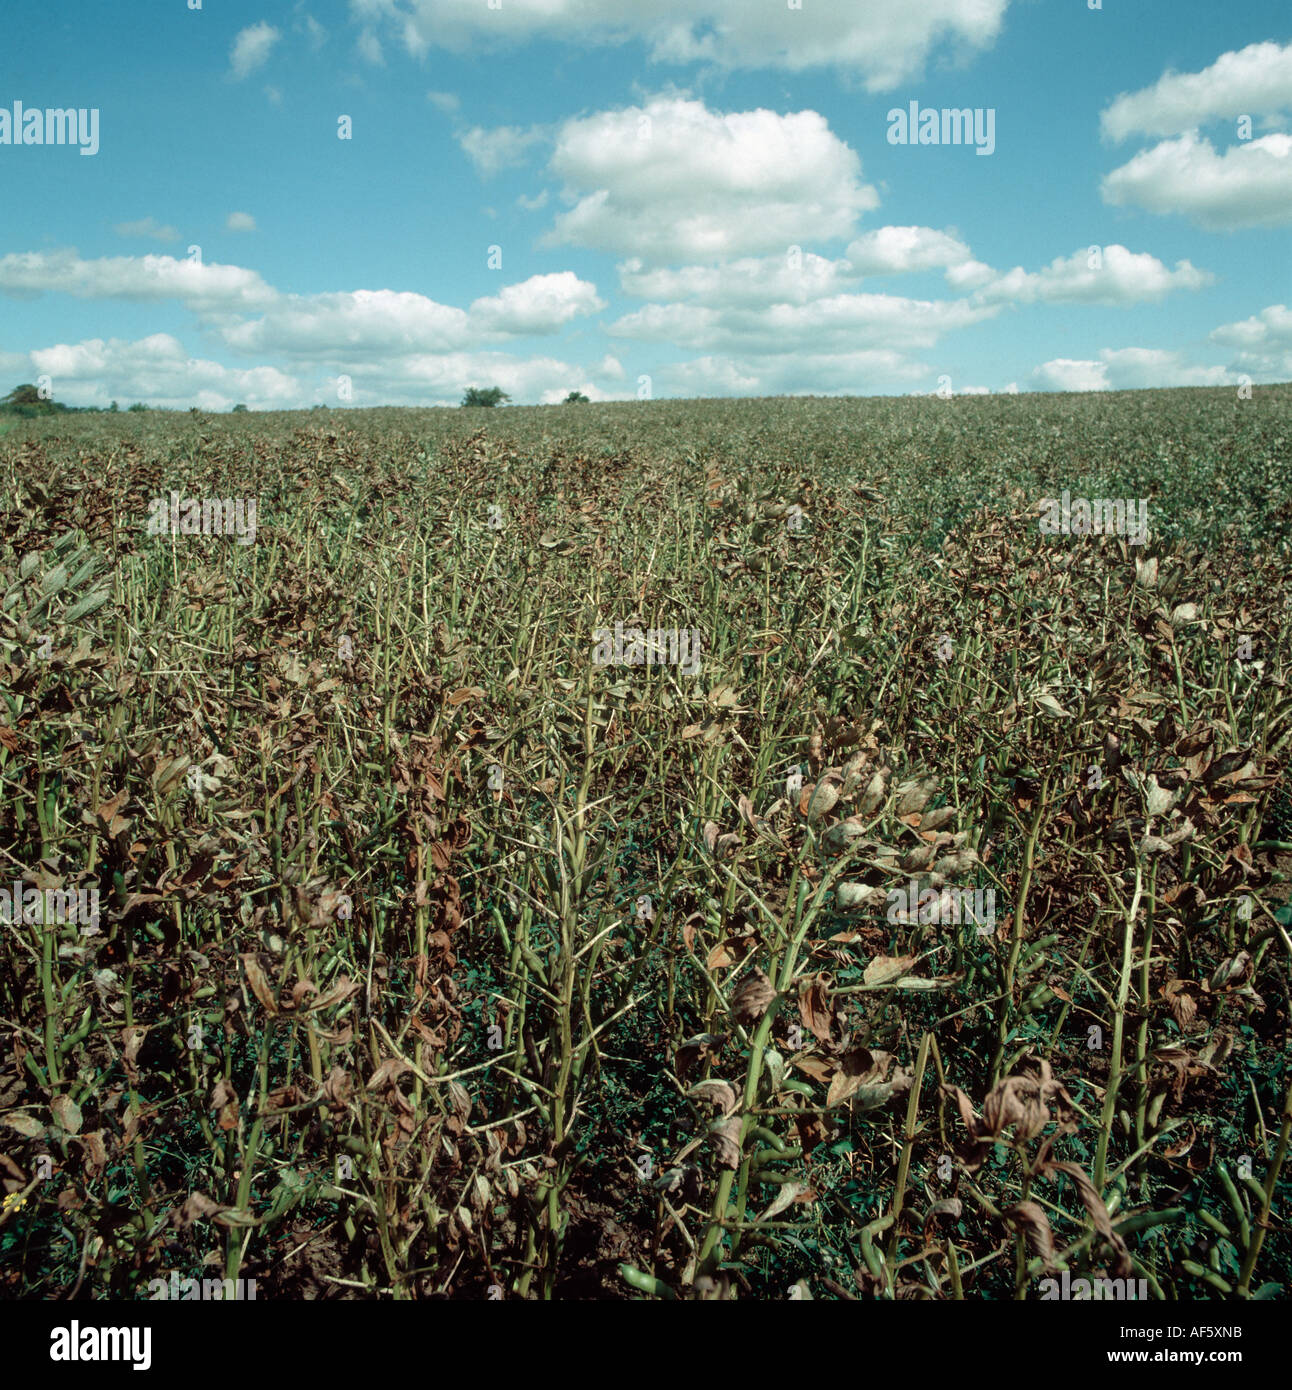 Severe infection of bean rust Uromyces viciae fabae on a field bean crop in pod Stock Photo